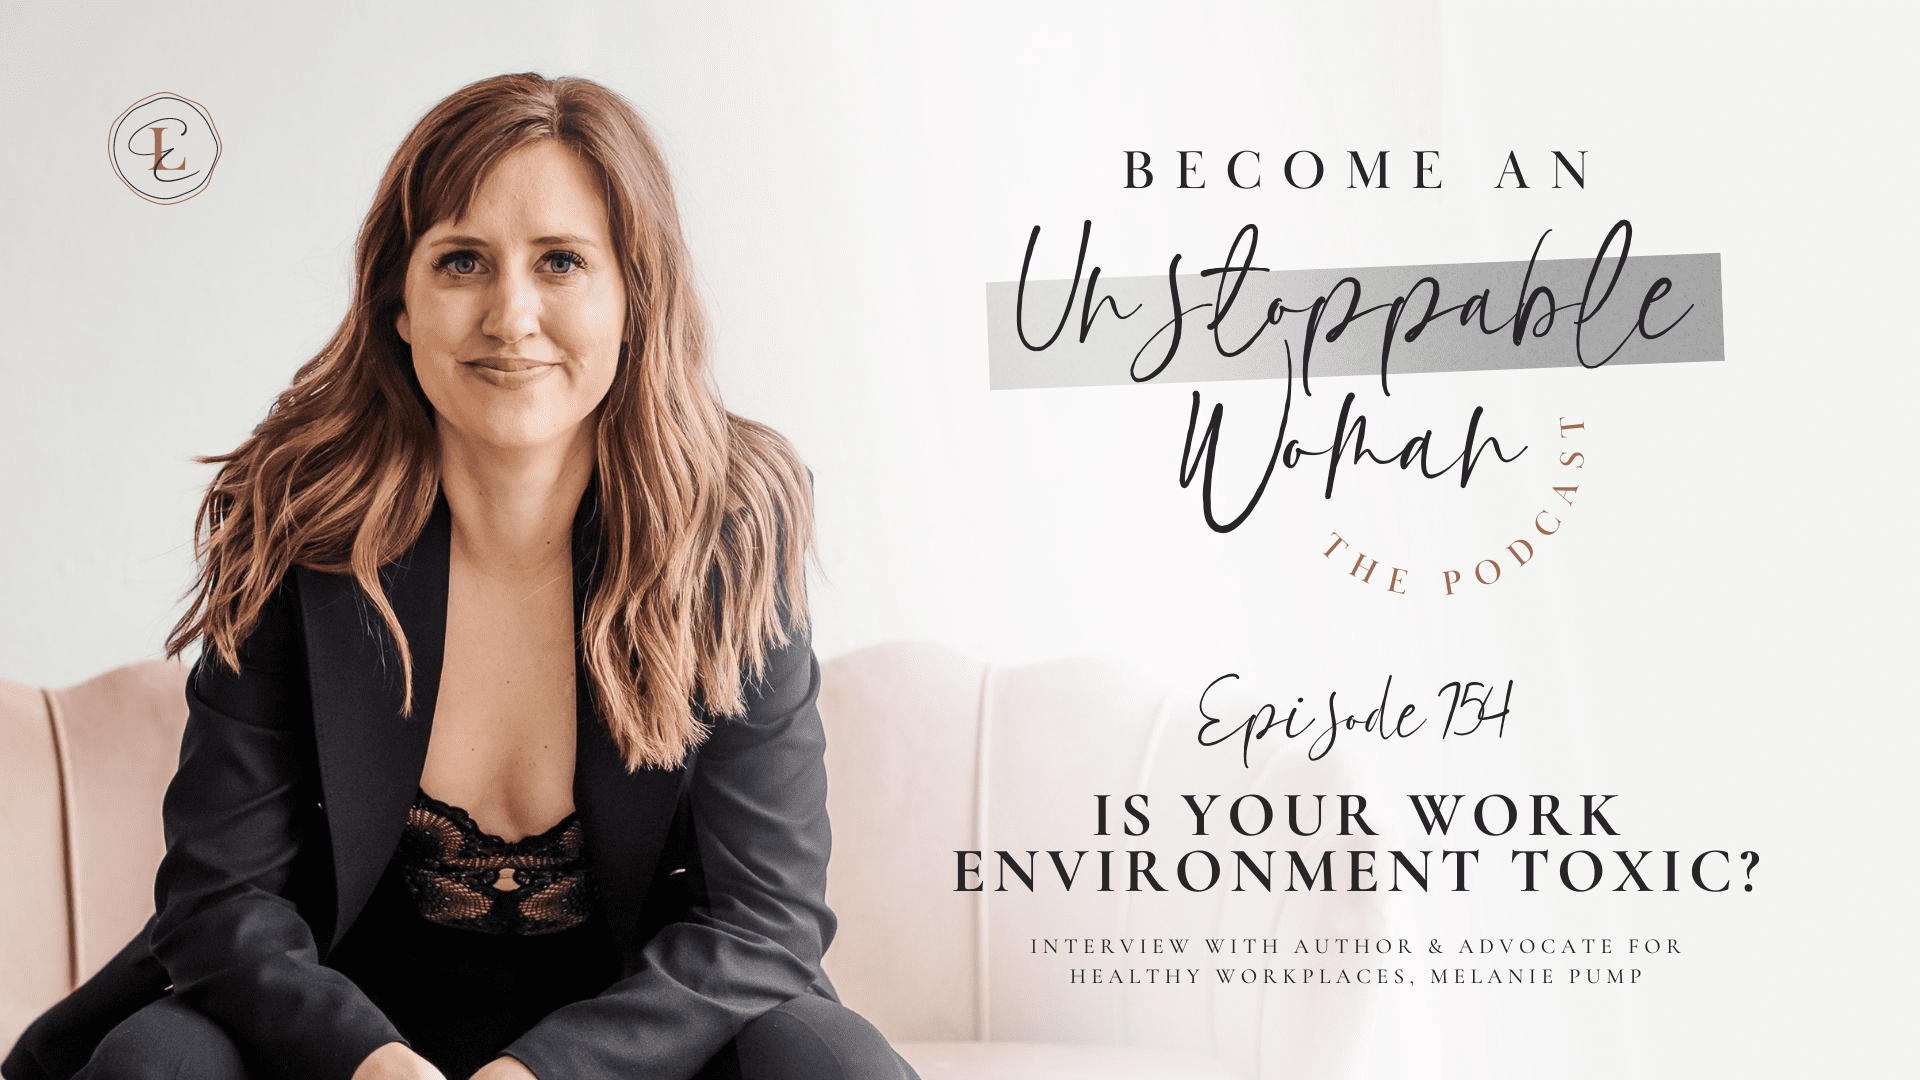 IS YOUR WORK ENVIRONMENT TOXIC? w/ Melanie Pump, Author and Advocate for Healthy Workplaces